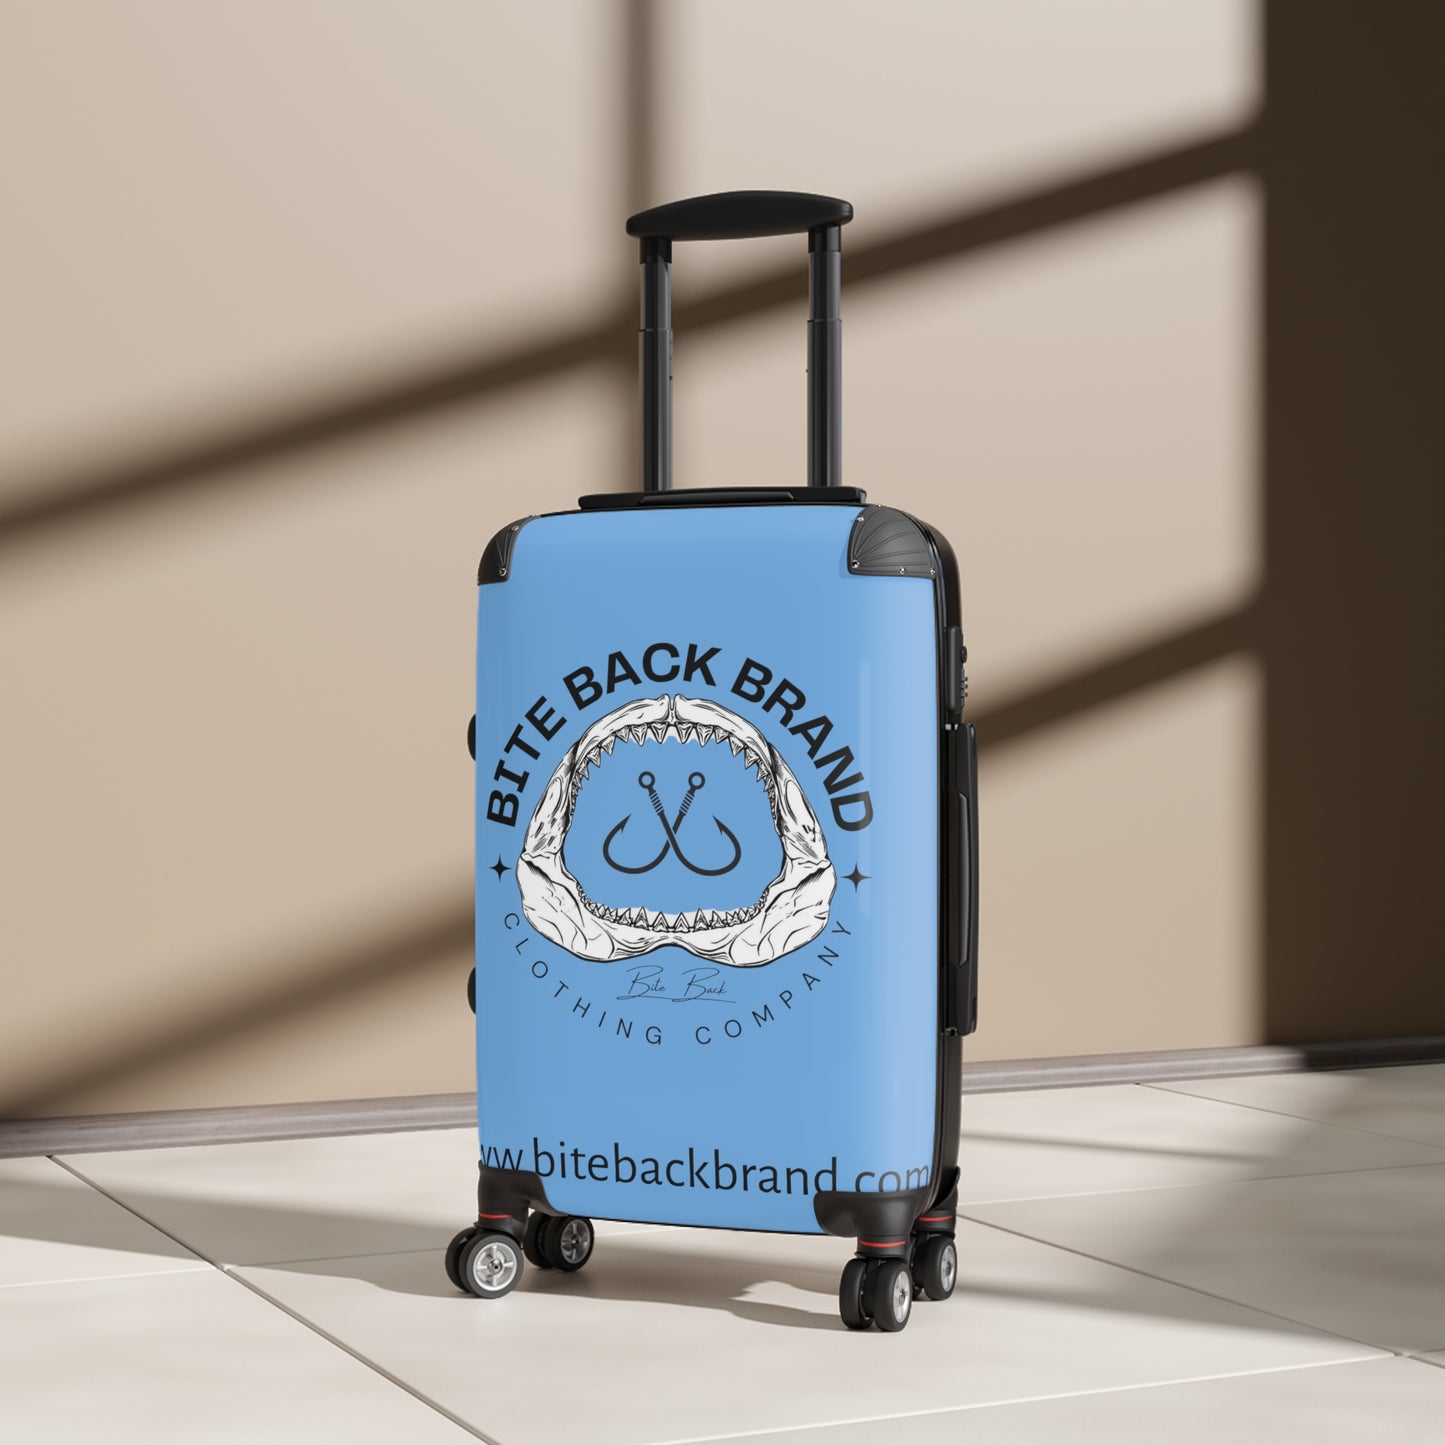 The International Luggage Collection